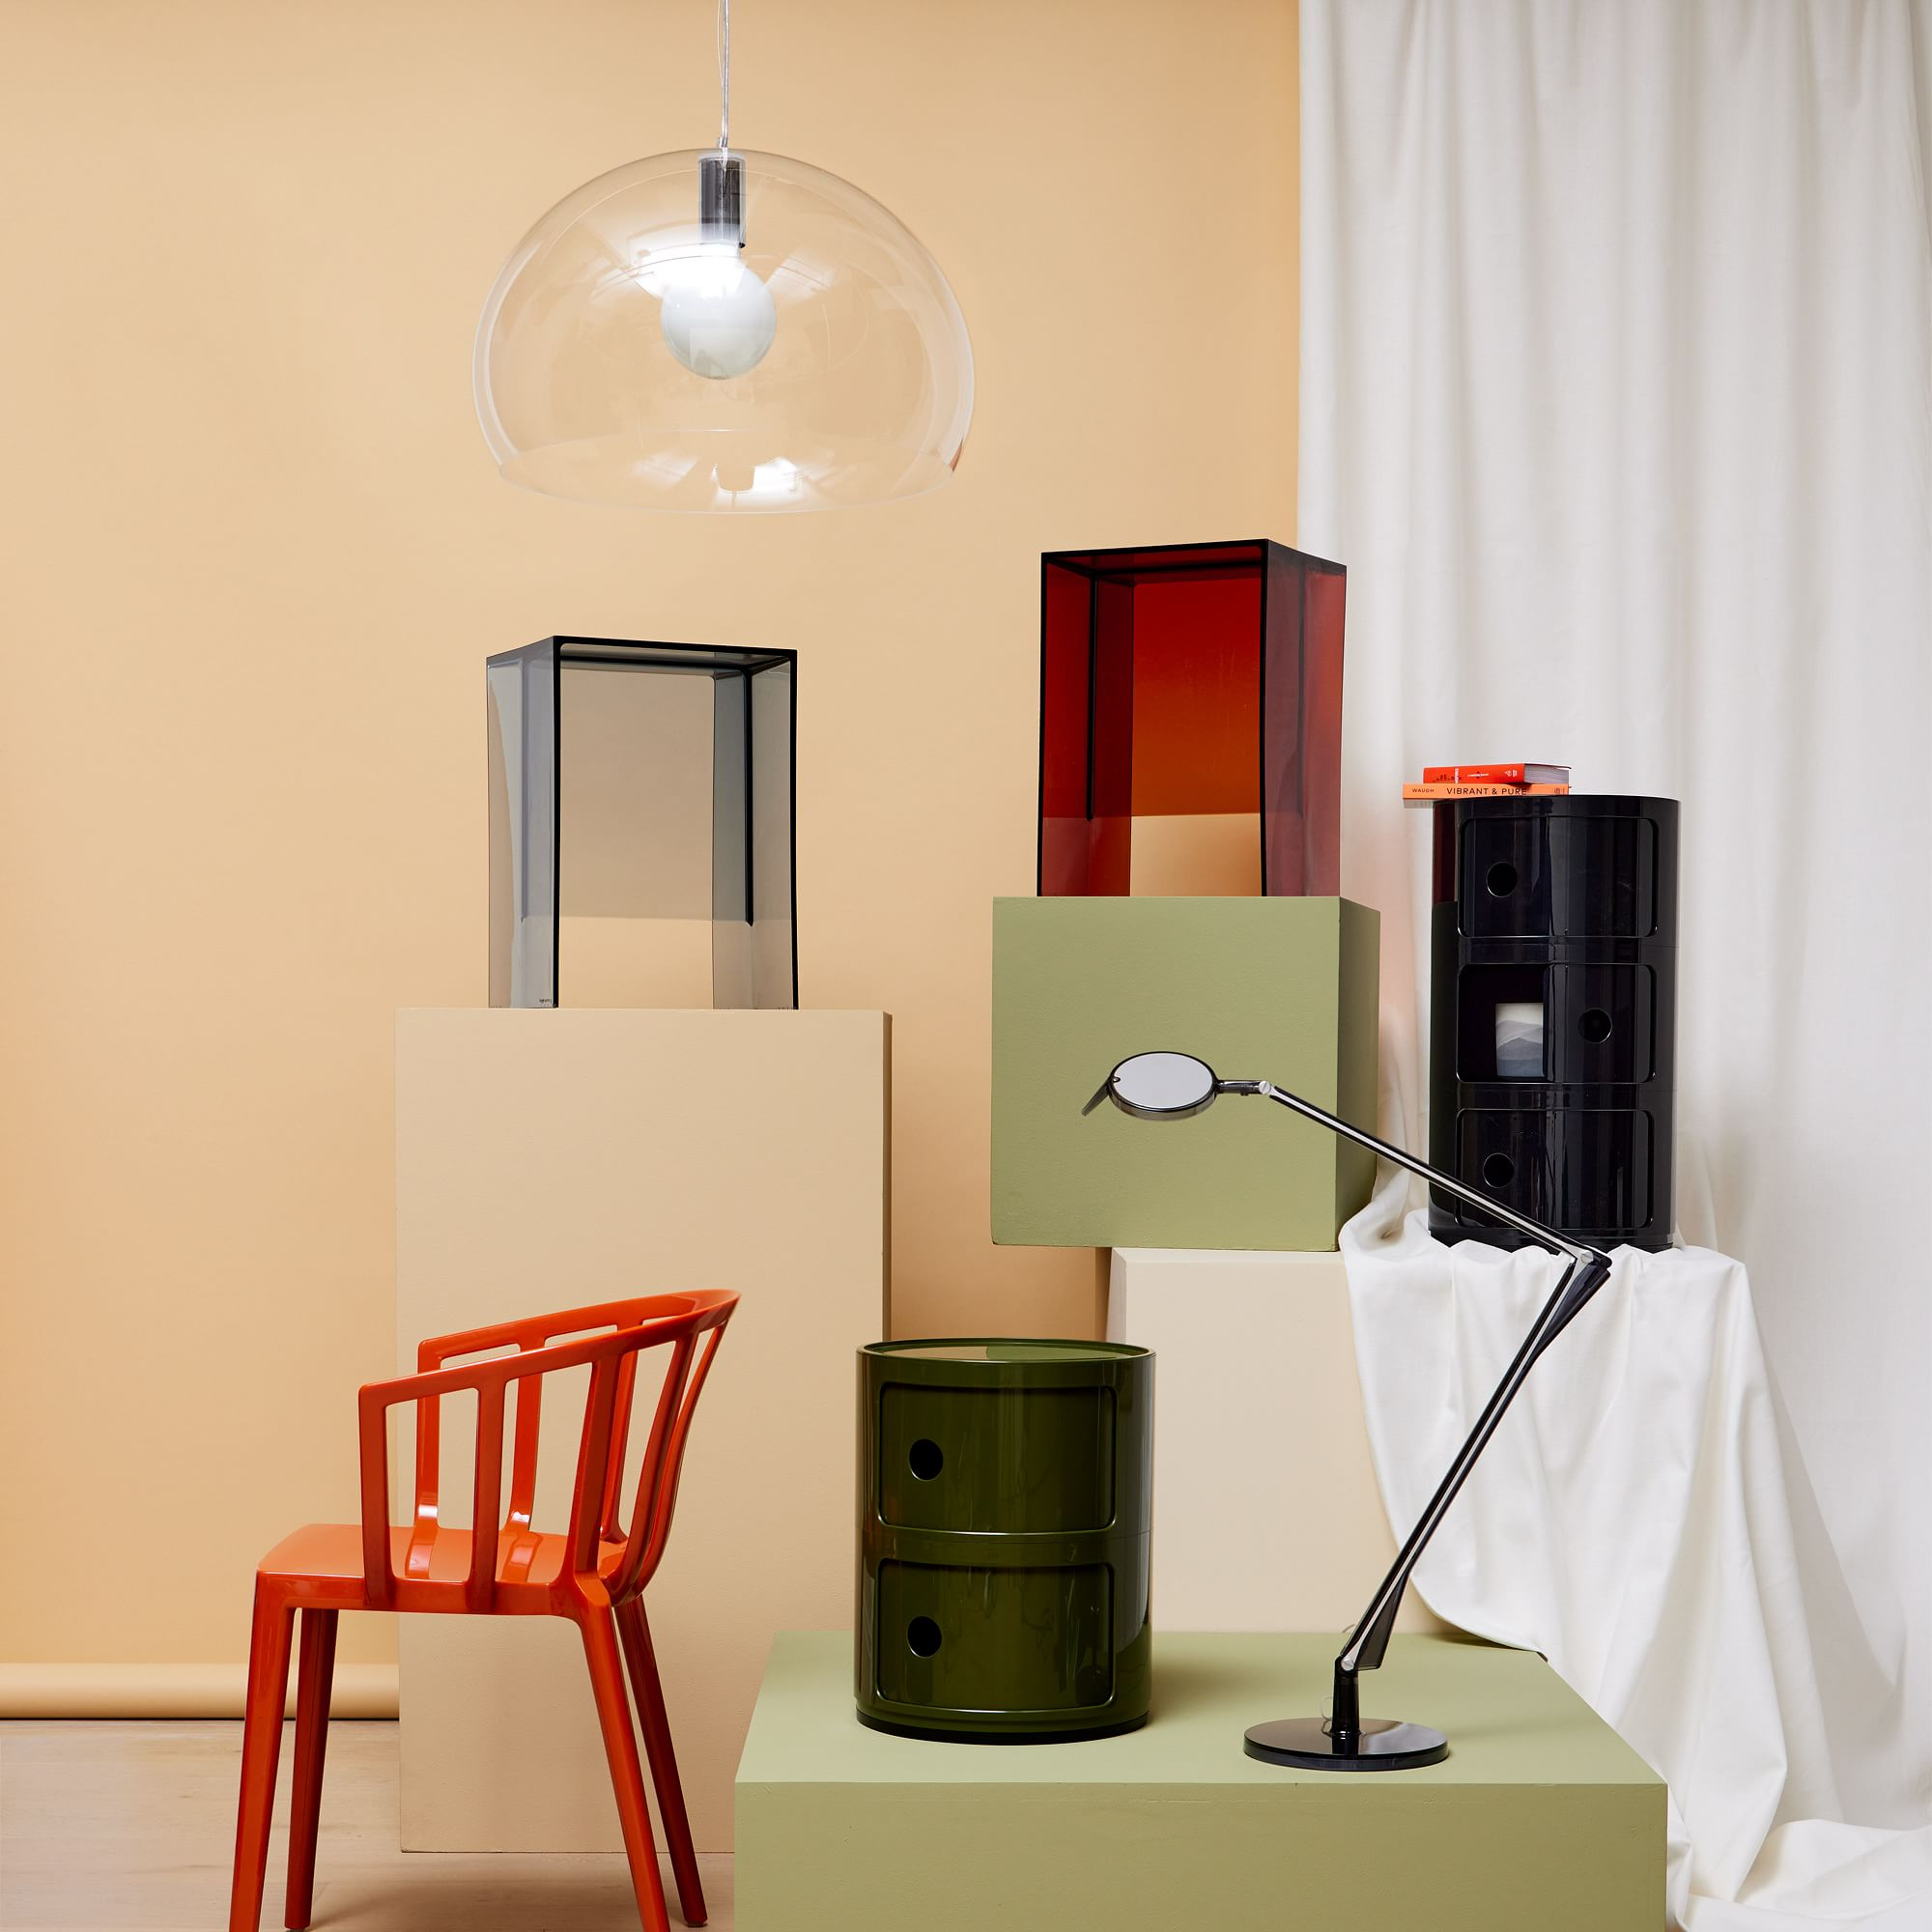 Kartell's Componibile, an icon of design